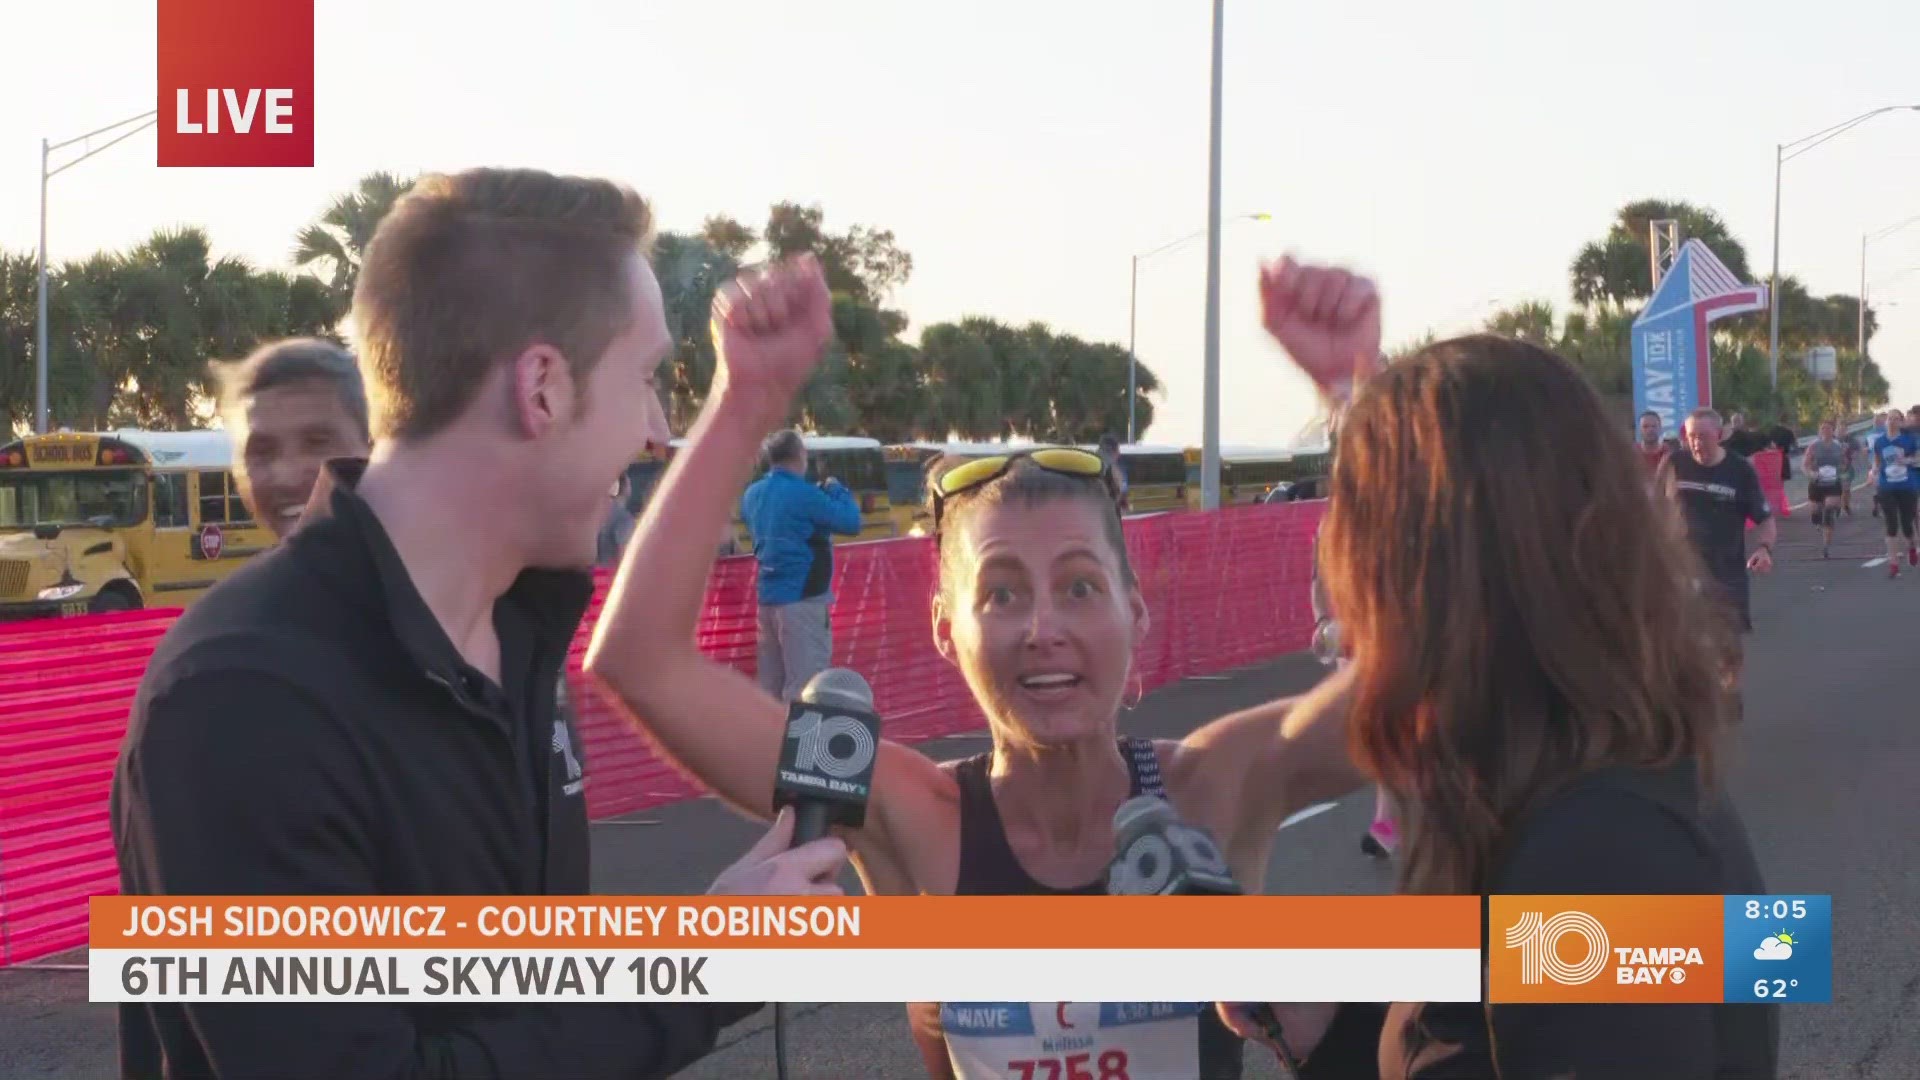 Perhaps the most difficult part of the Skyway 10K is the incline on the Sunshine Skyway Bridge.